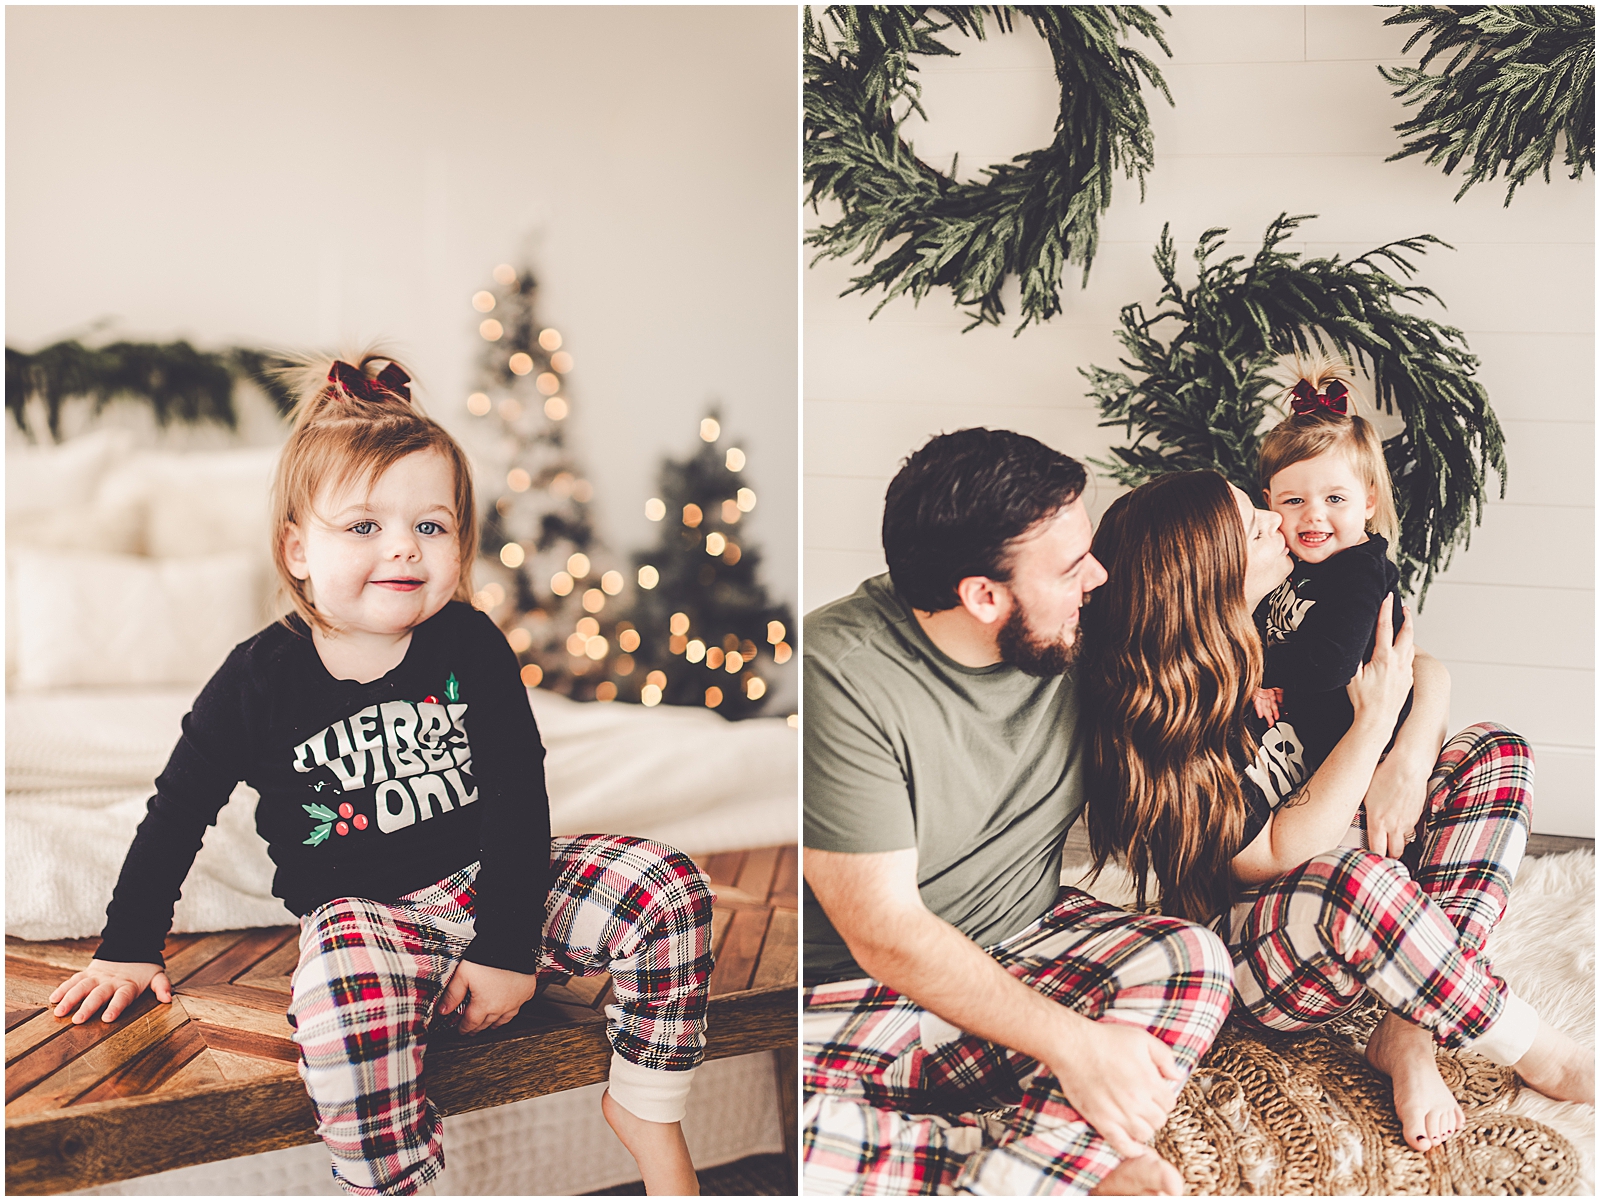 Holiday mini sessions at the natural light Studio 388 owned by Kyle and Kara Evans at Kara Evans Photographer in Kankakee, Illinois.